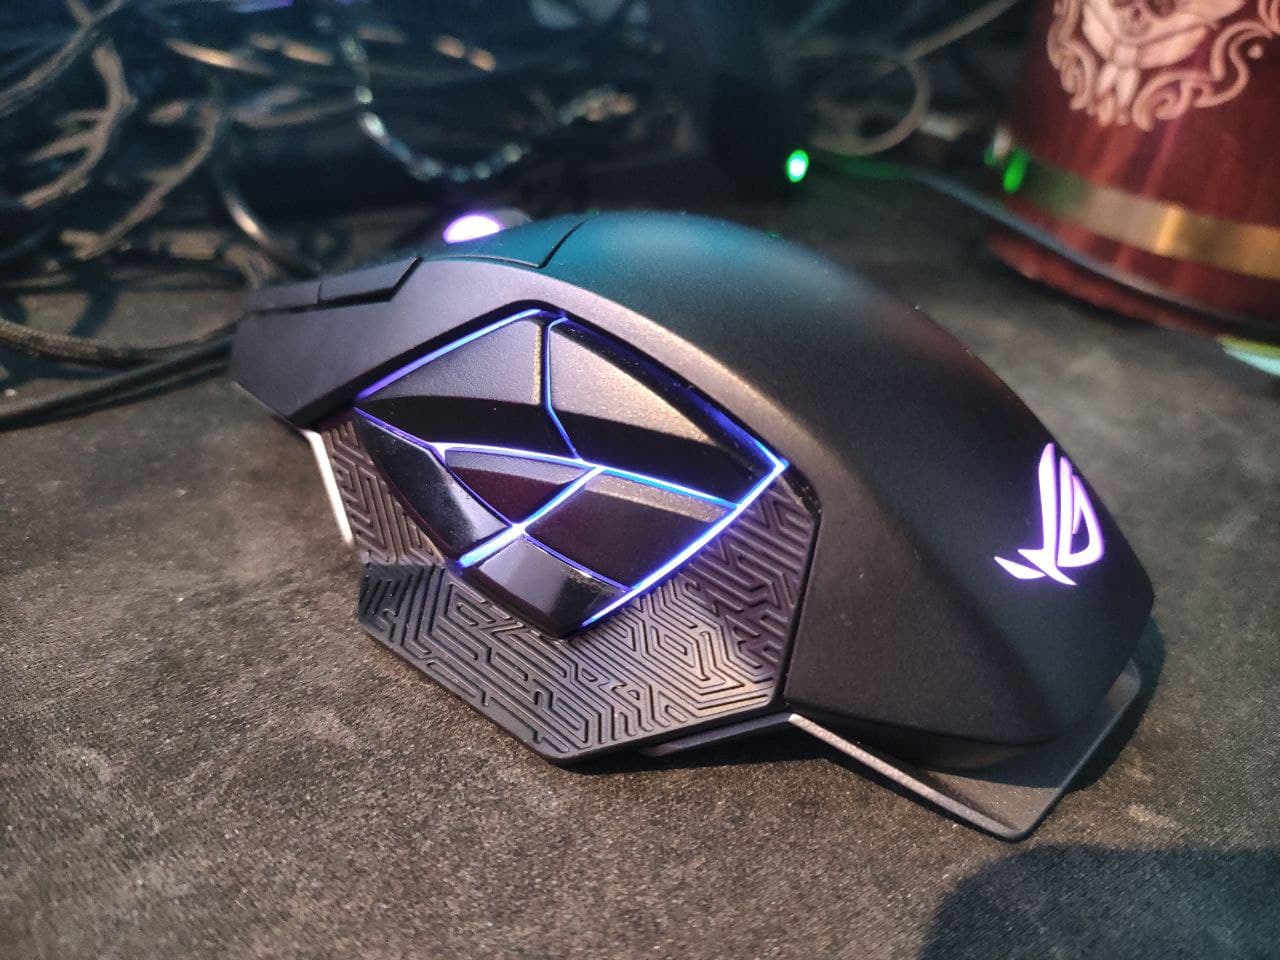 Official Gbatemp Review Asus Rog Spatha X Wireless Gaming Mouse Hardware Gbatemp Net The Independent Video Game Community